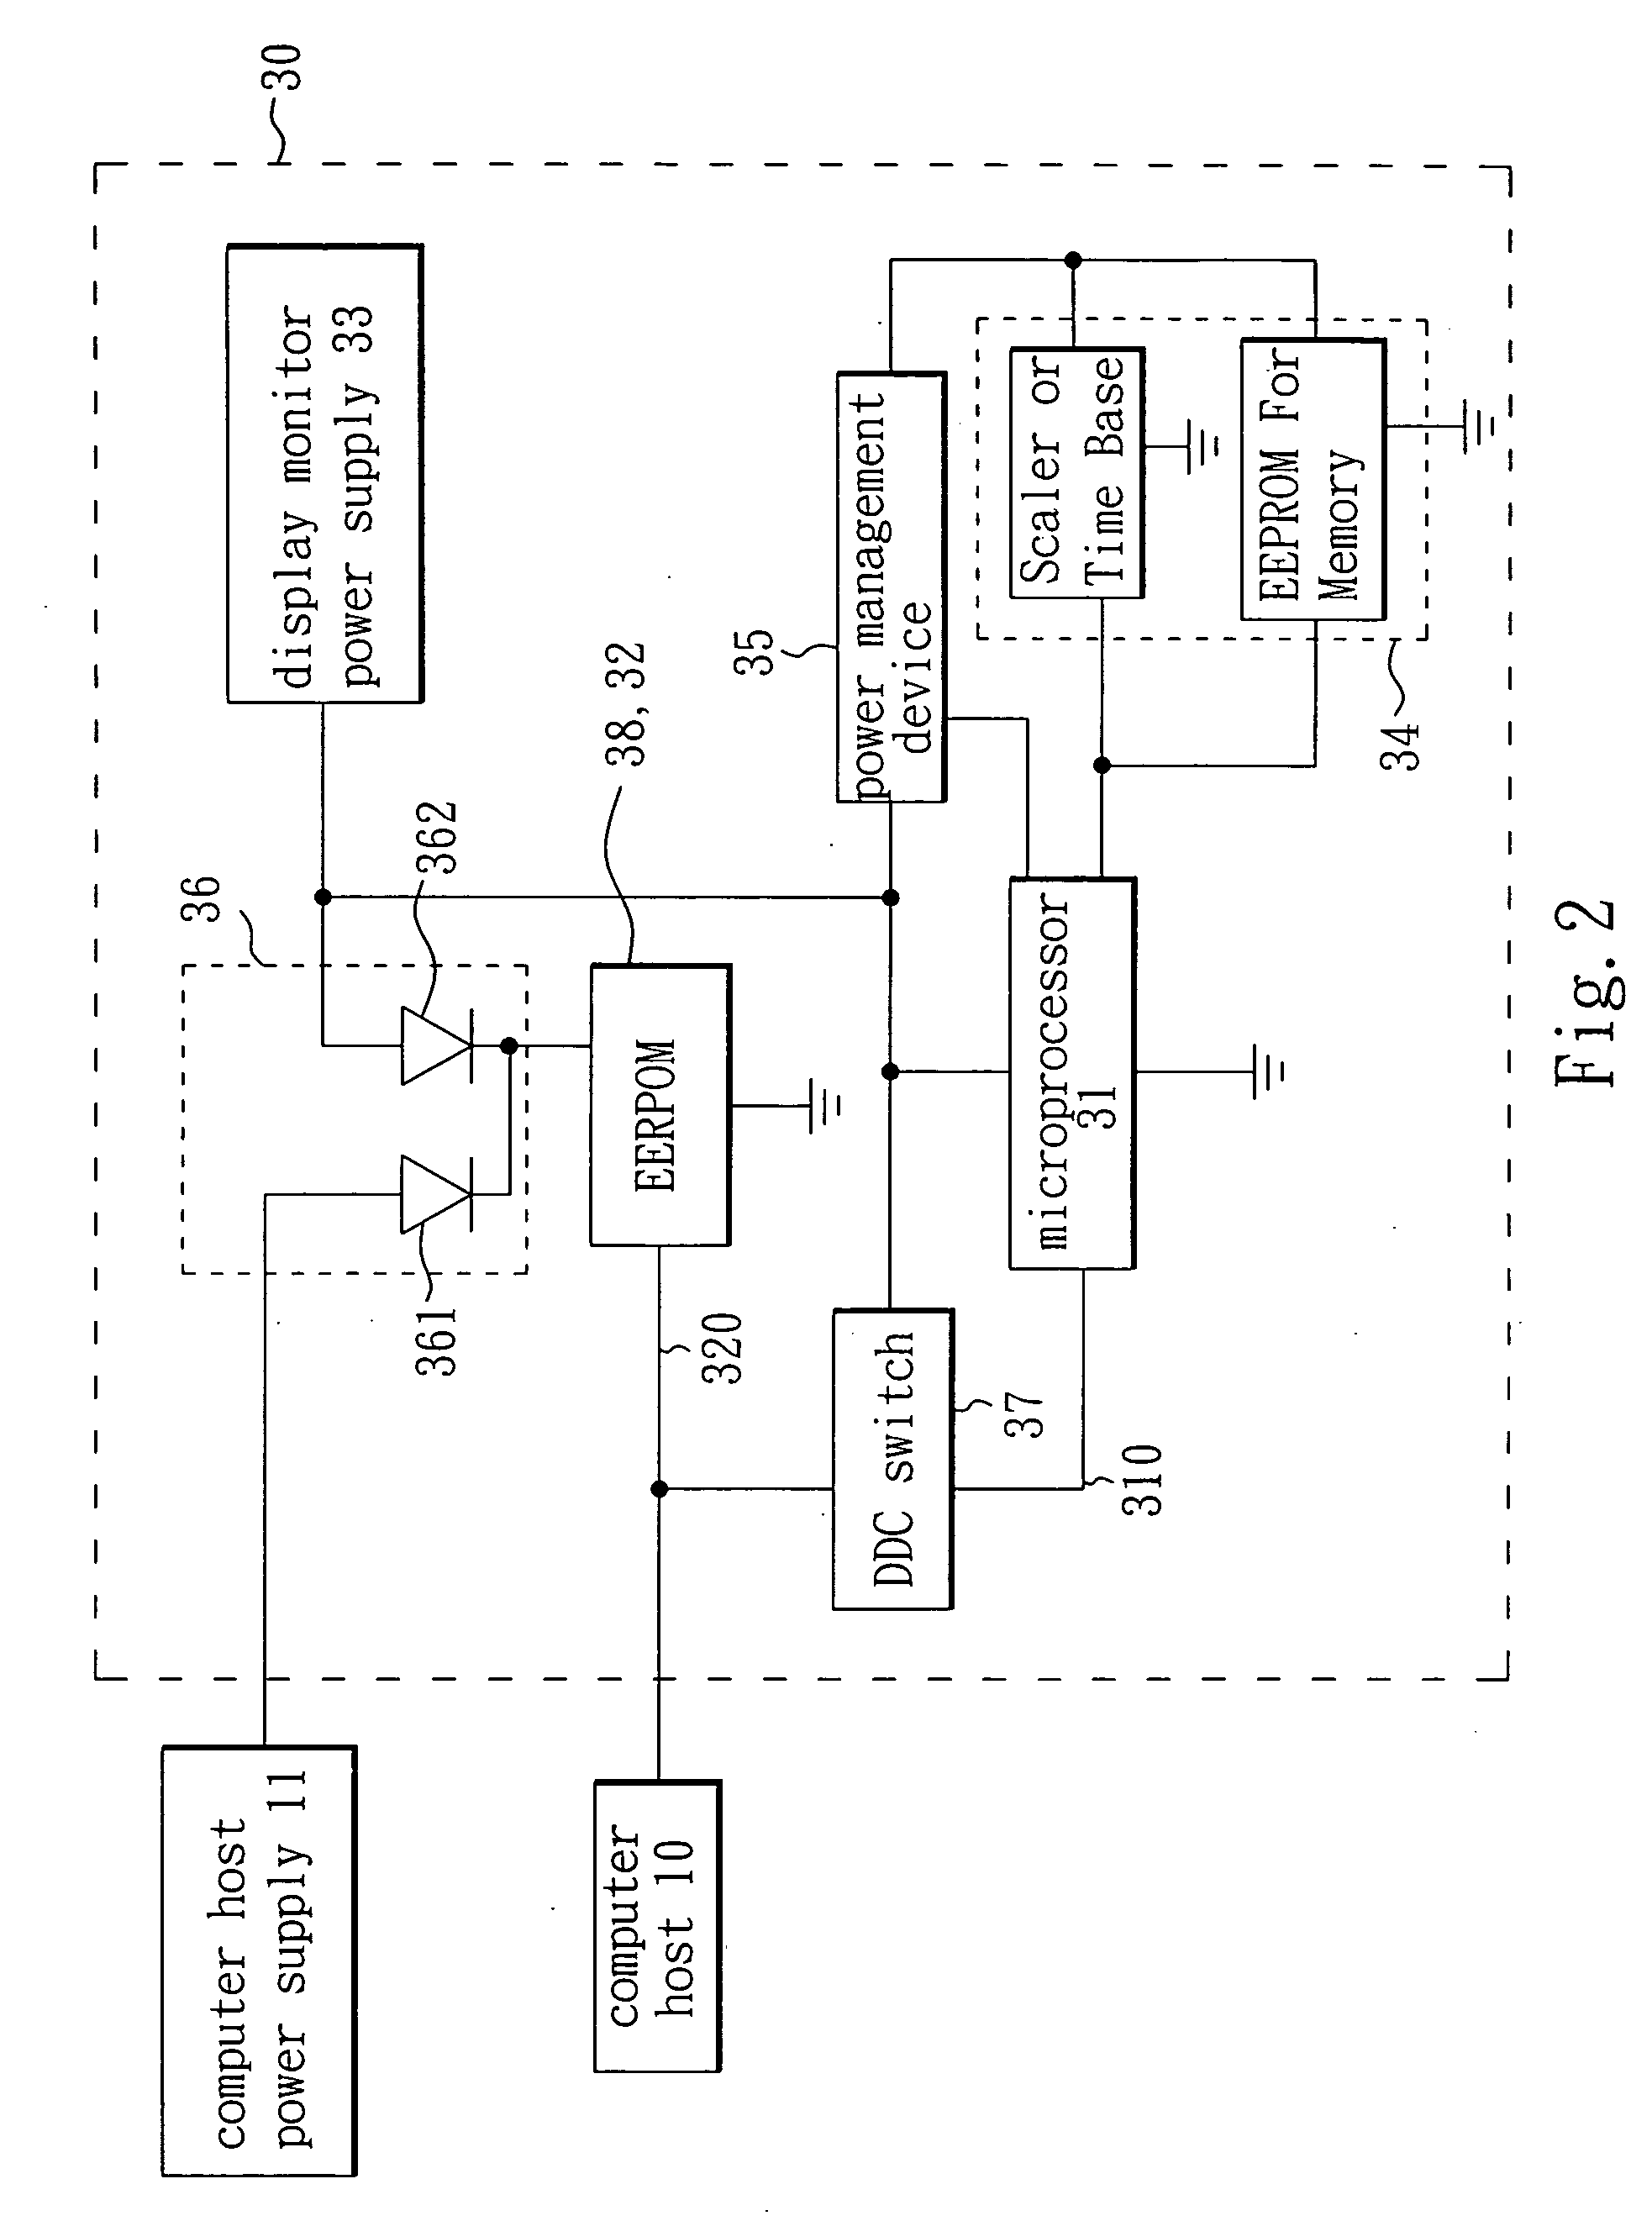 Display monitor with a common display data channel